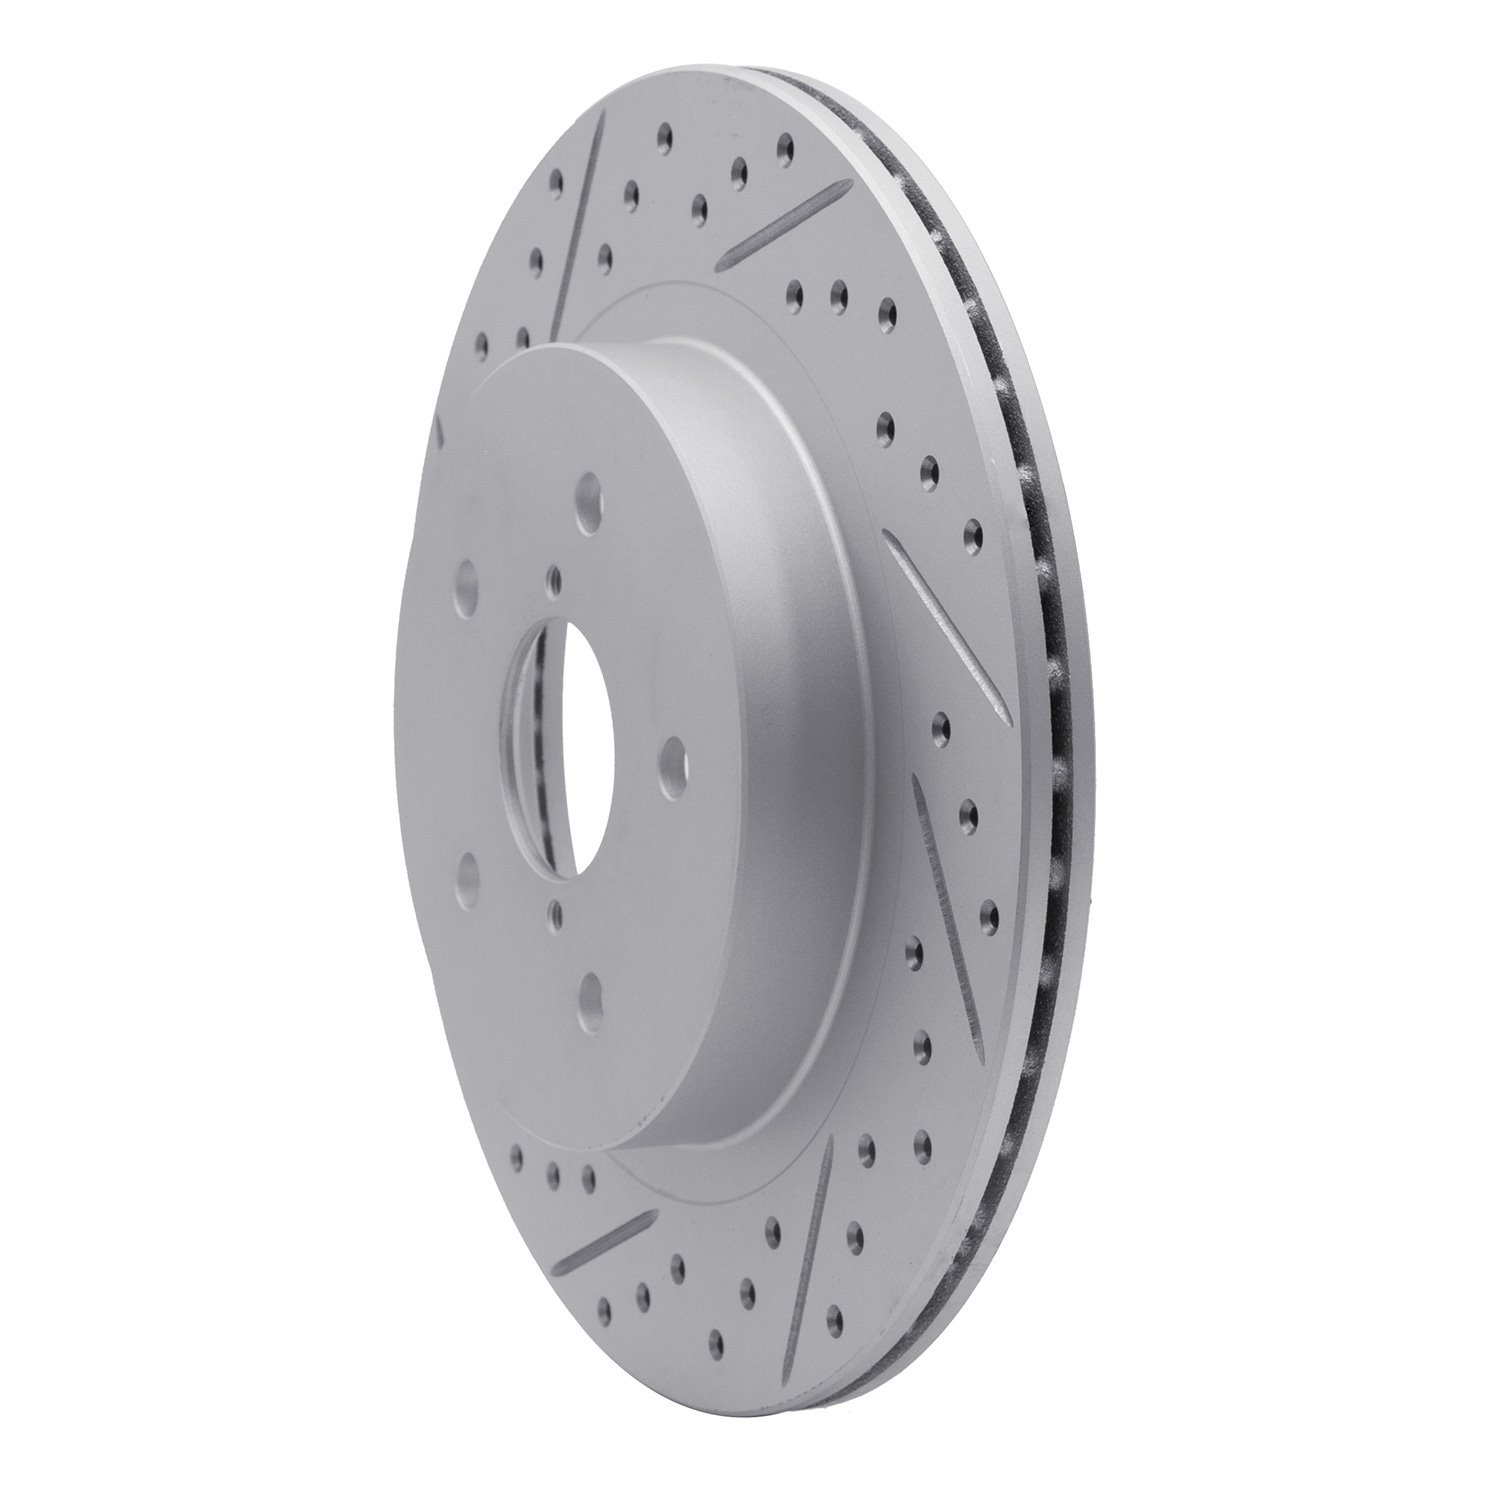 830-13028L Geoperformance Drilled/Slotted Brake Rotor, Fits Select Subaru, Position: Rear Left